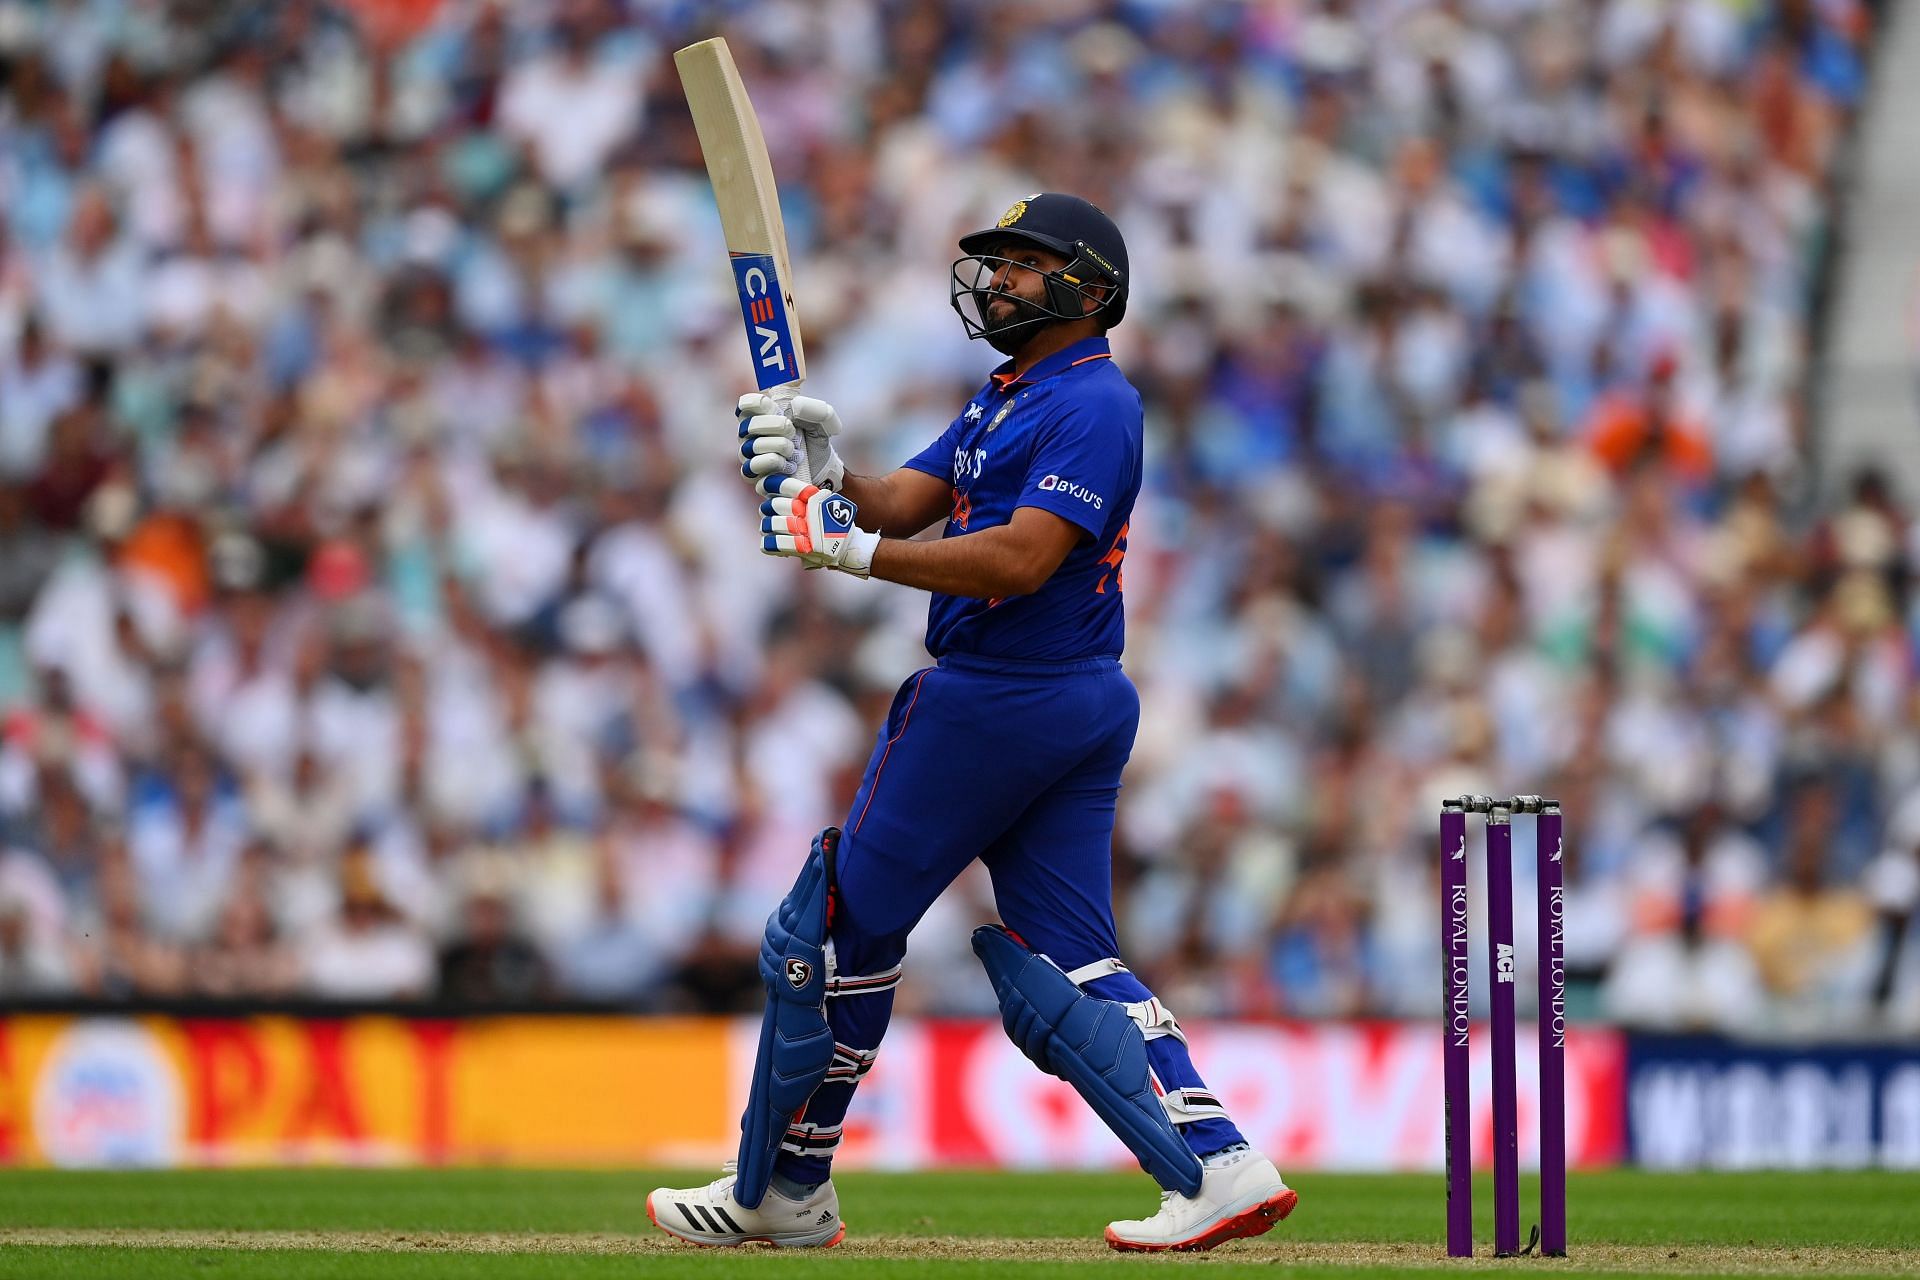 Rohit Sharma is regarded as one of the best pullers in the modern game